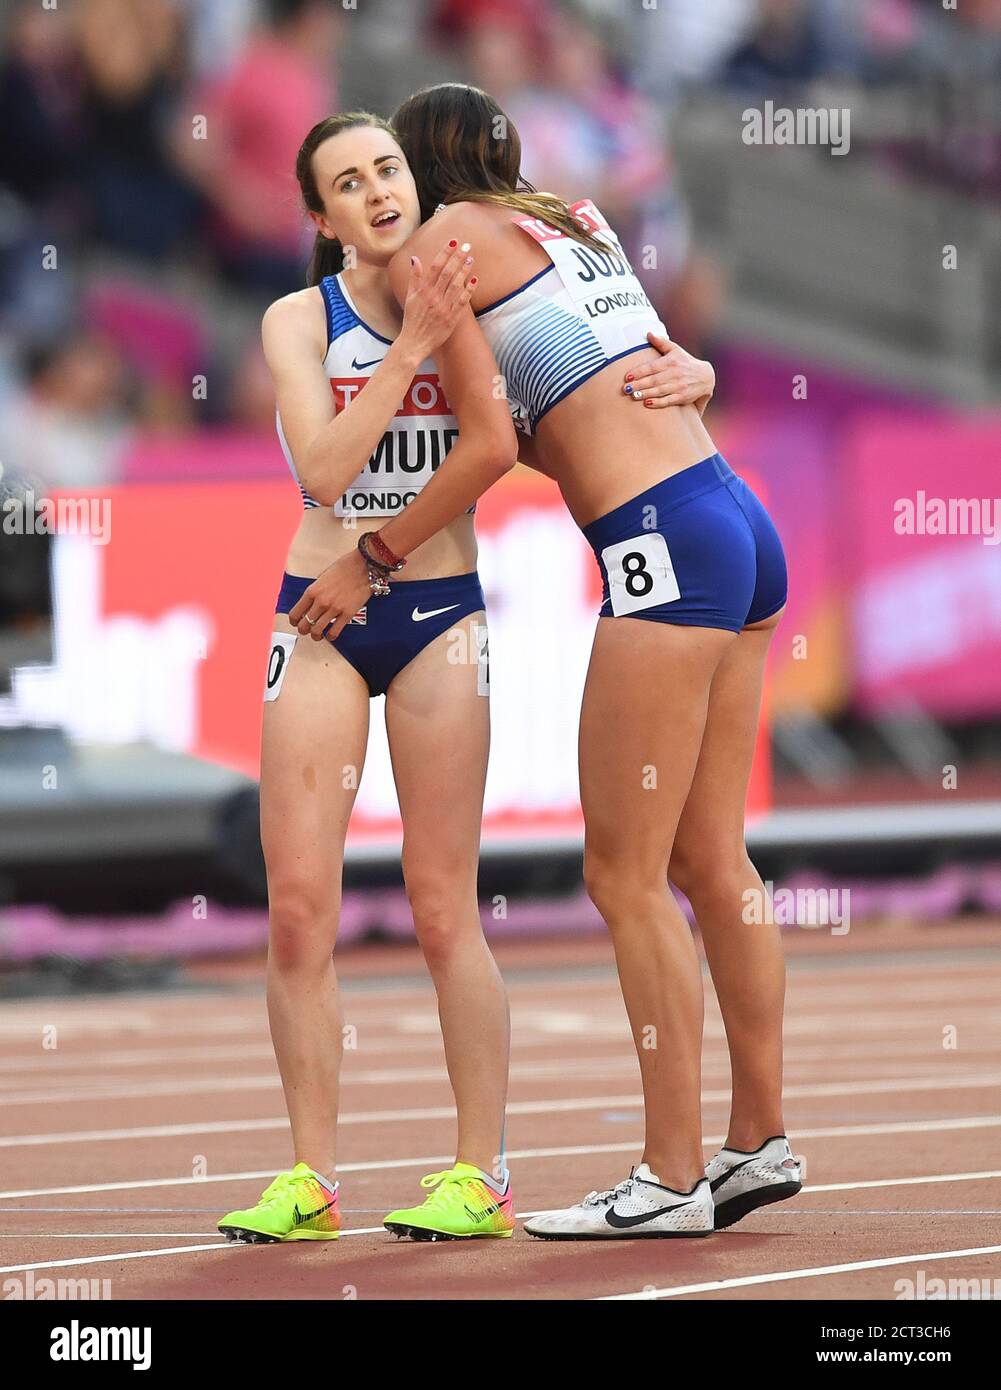 Laura Muir qualifies for the womens 1500 metre final and consoles Jesscia Judd who missed out   World Athletics Championships 2017 The London Stadium Stock Photo